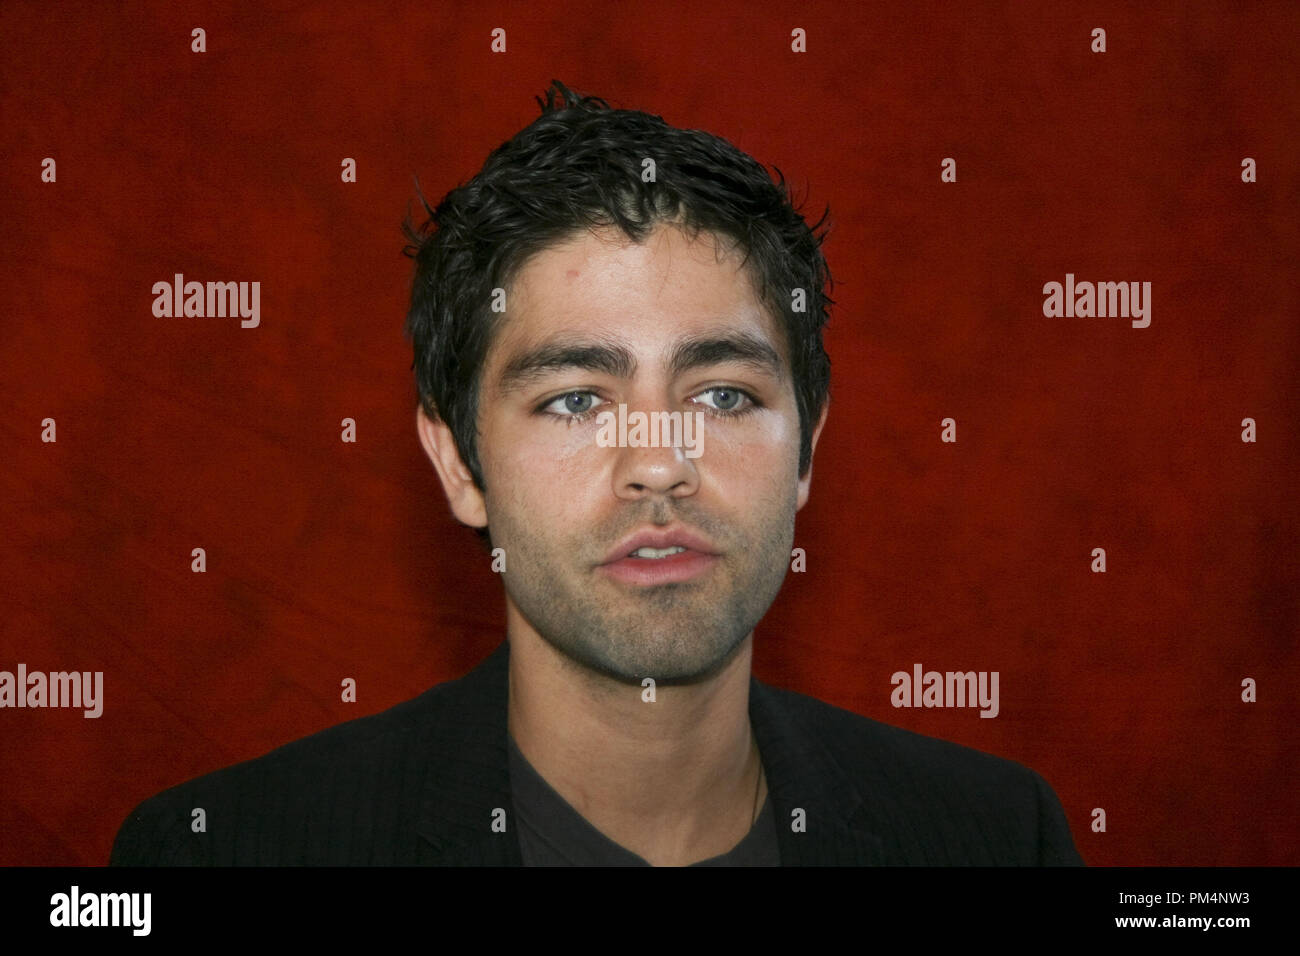 Adrian Grenier 'Teenage Paparazzo' Portrait Session, August 16, 2010.  Reproduction by American tabloids is absolutely forbidden. File Reference # 30445 011JRC  For Editorial Use Only -  All Rights Reserved Stock Photo